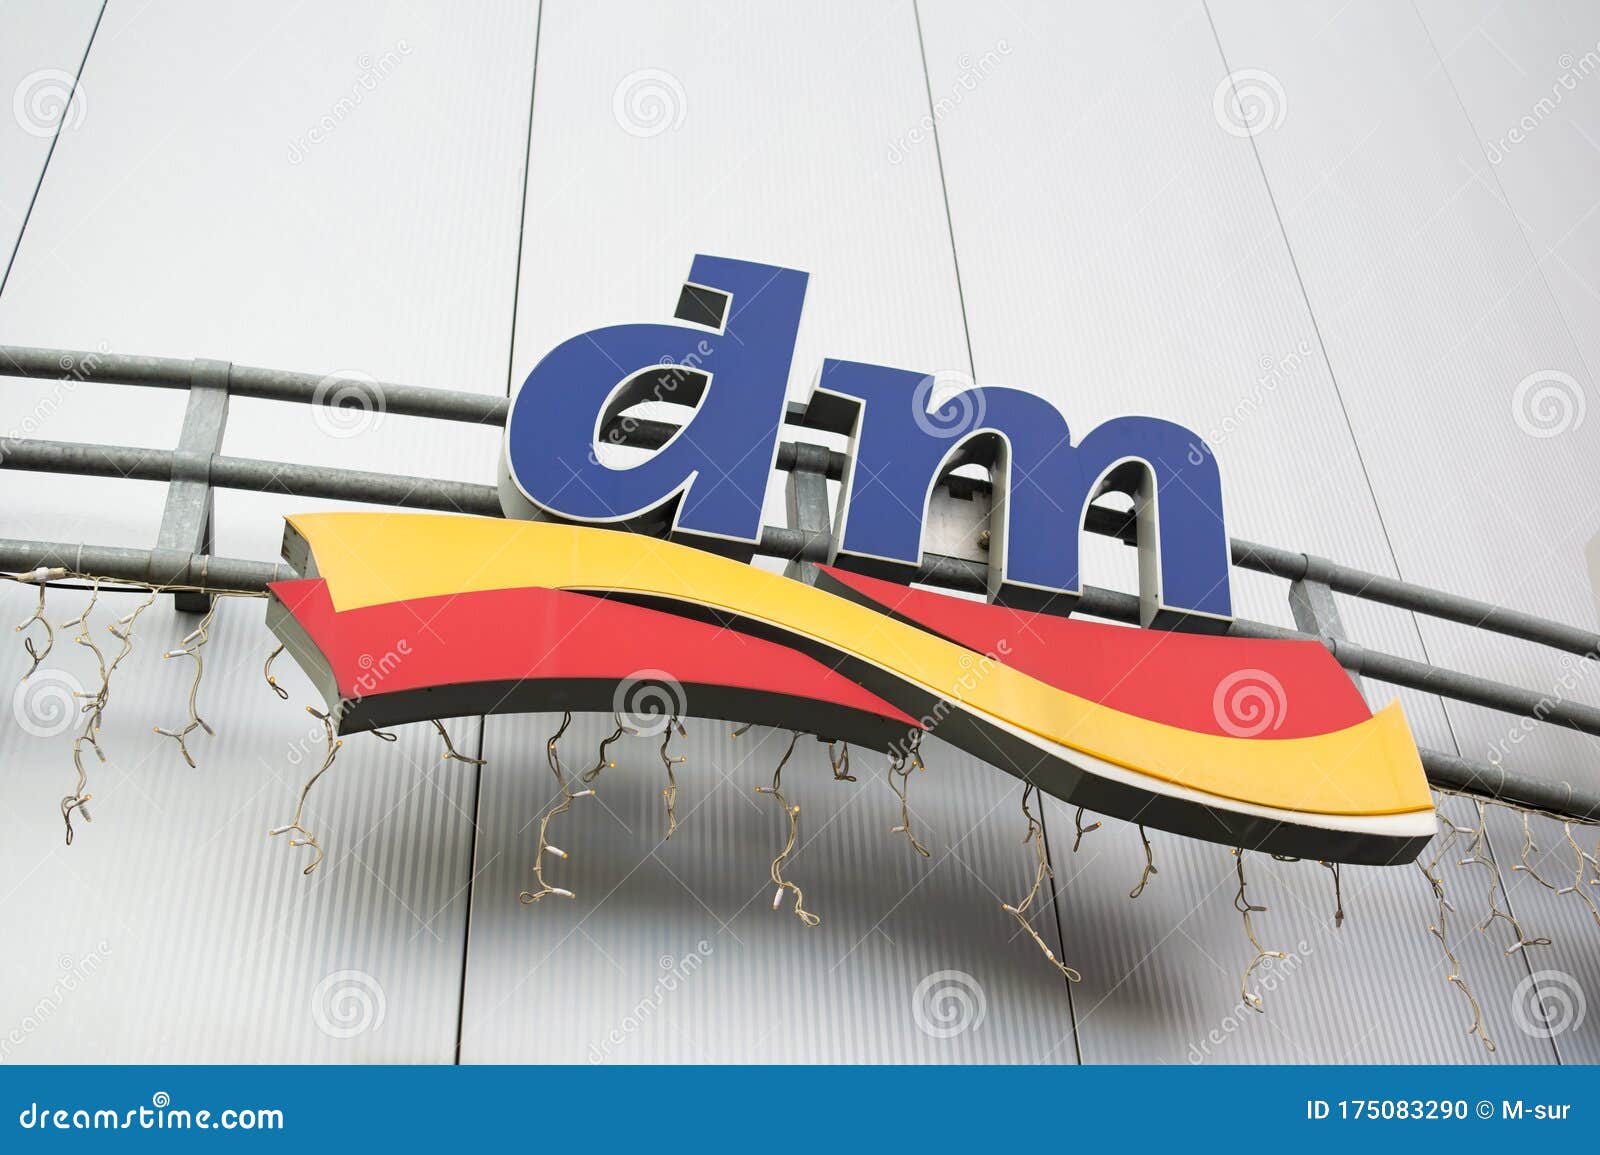 DM - Brand Logo of Company of Drugstores, Stores, Shops Editorial Image ...